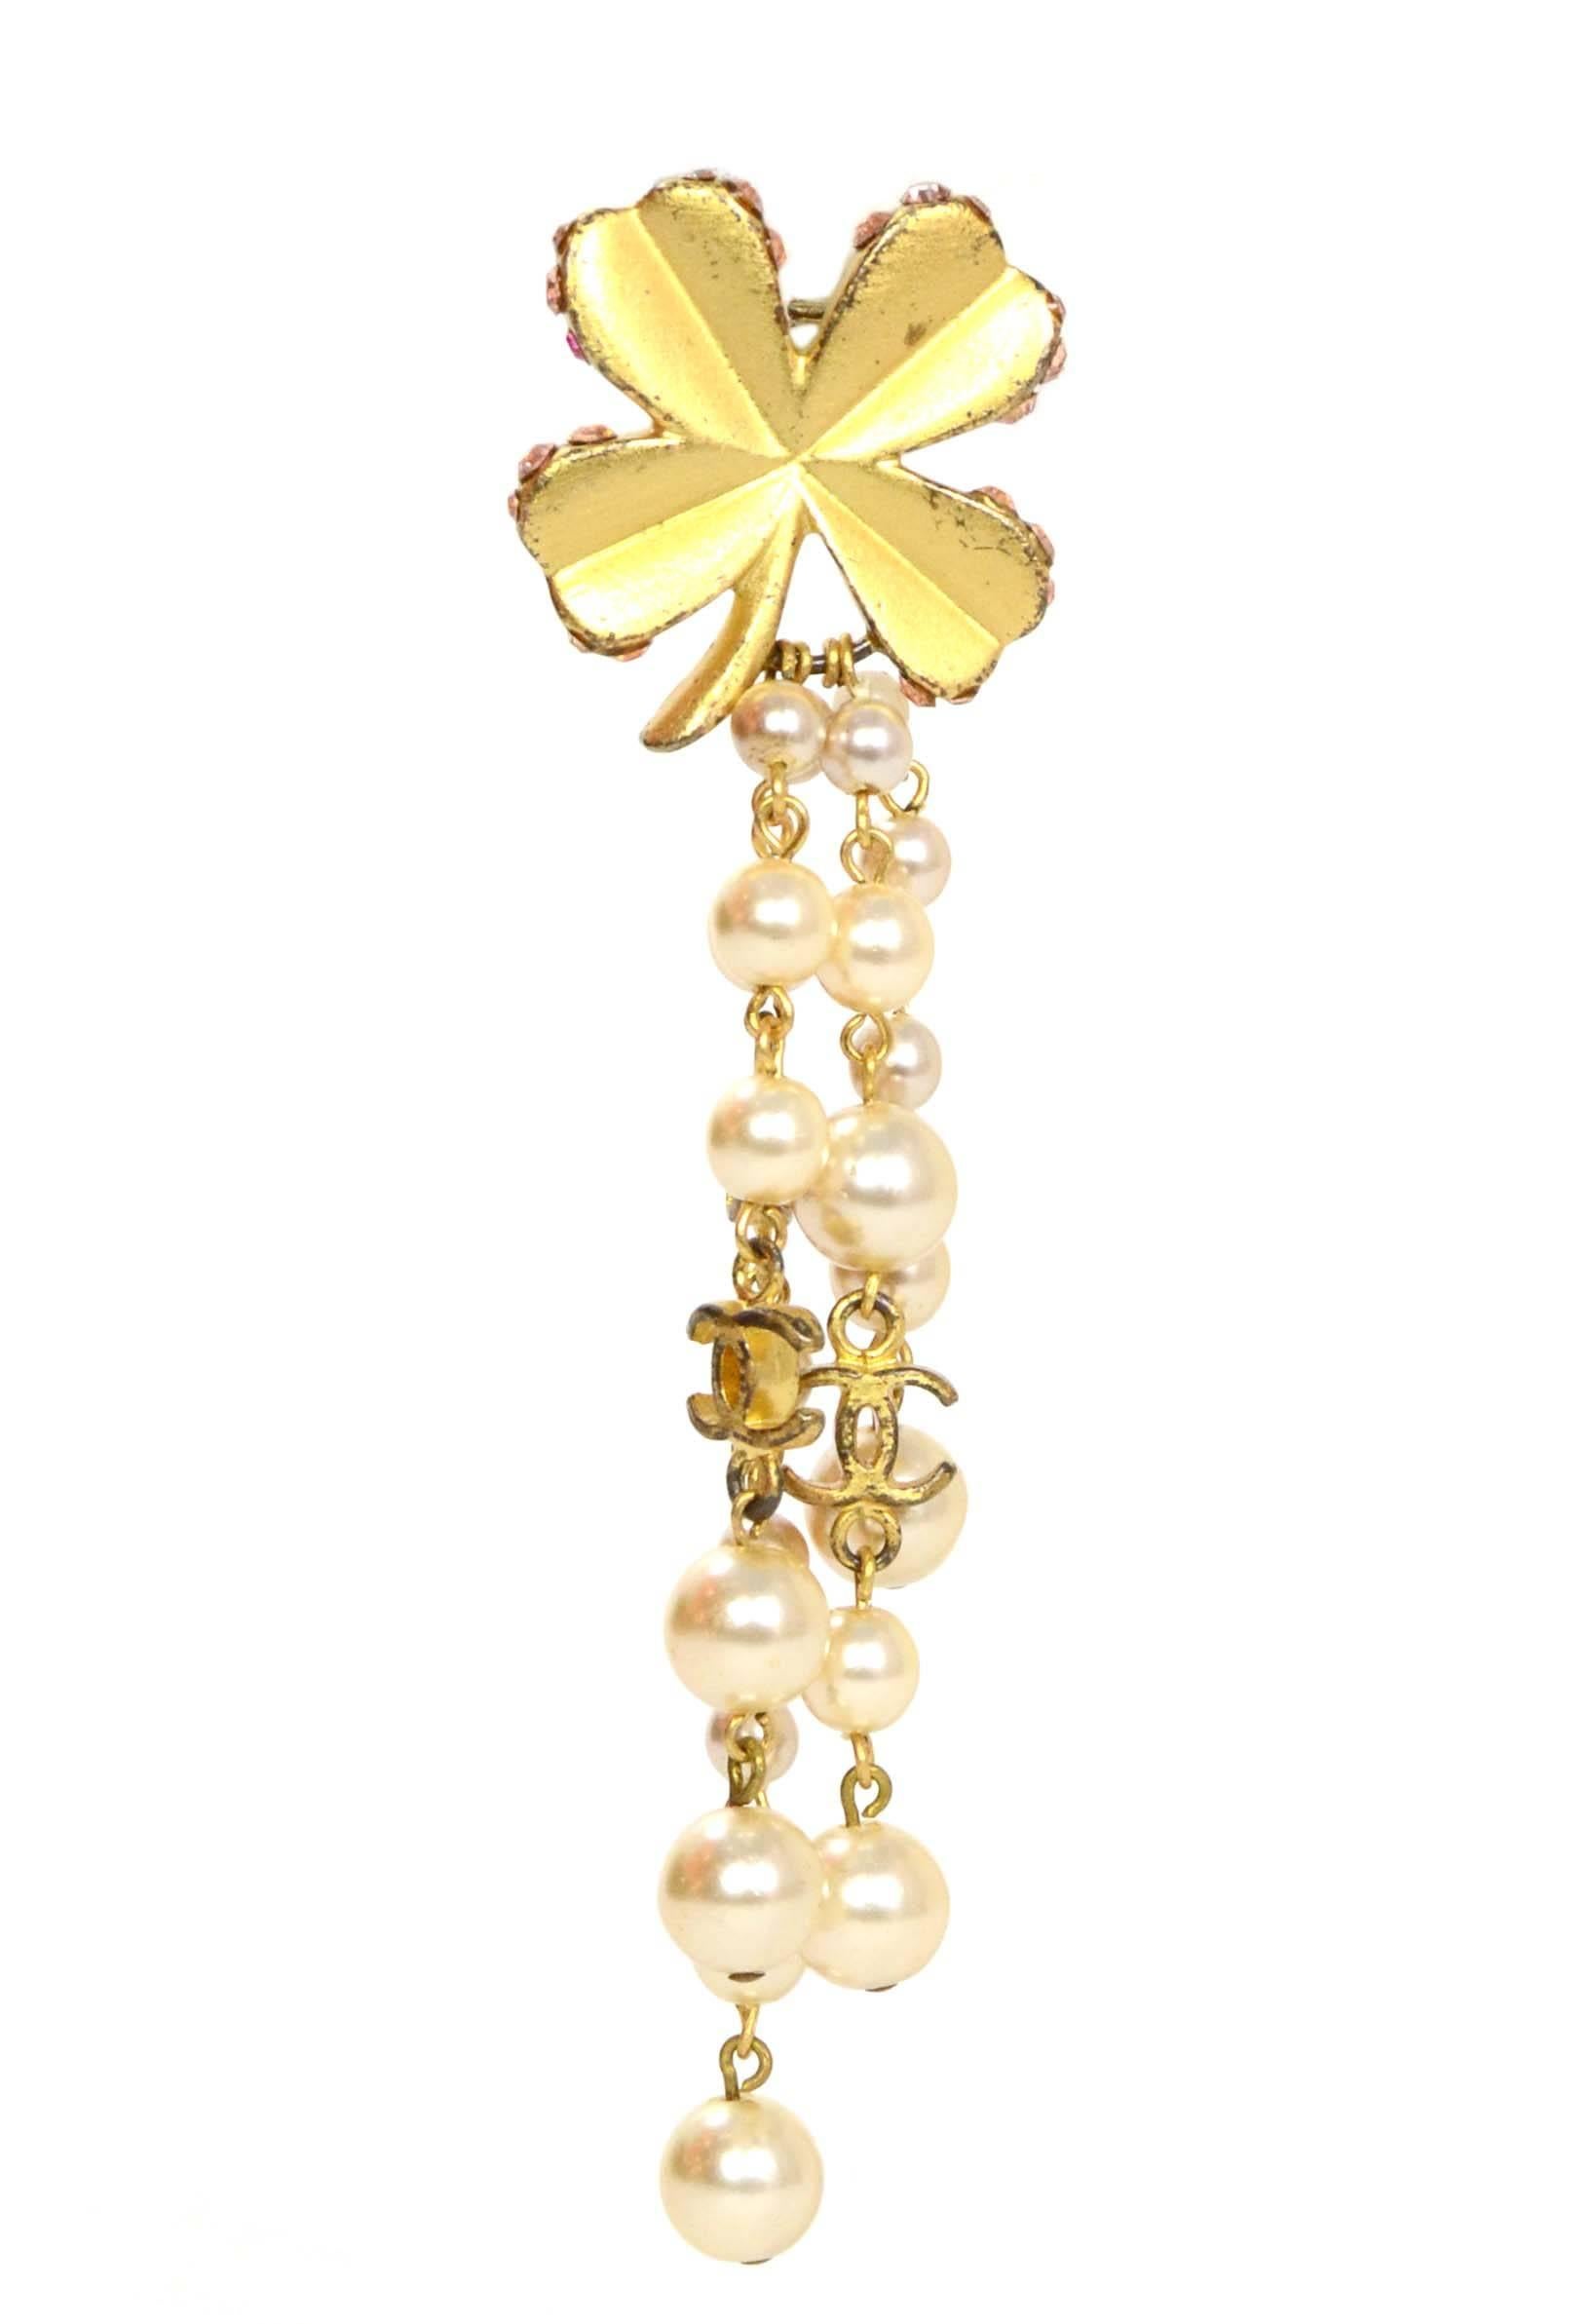 Chanel Gold Clover & Pearl Brooch
Features rhinestones around border
Made In: France
Year of Production: 2003
Stamp: 03 CC P
Closure: Pin back closure
Color: Brushed goldtone
Materials: Metal, faux pearls, and rhinestones
Overall Condition: